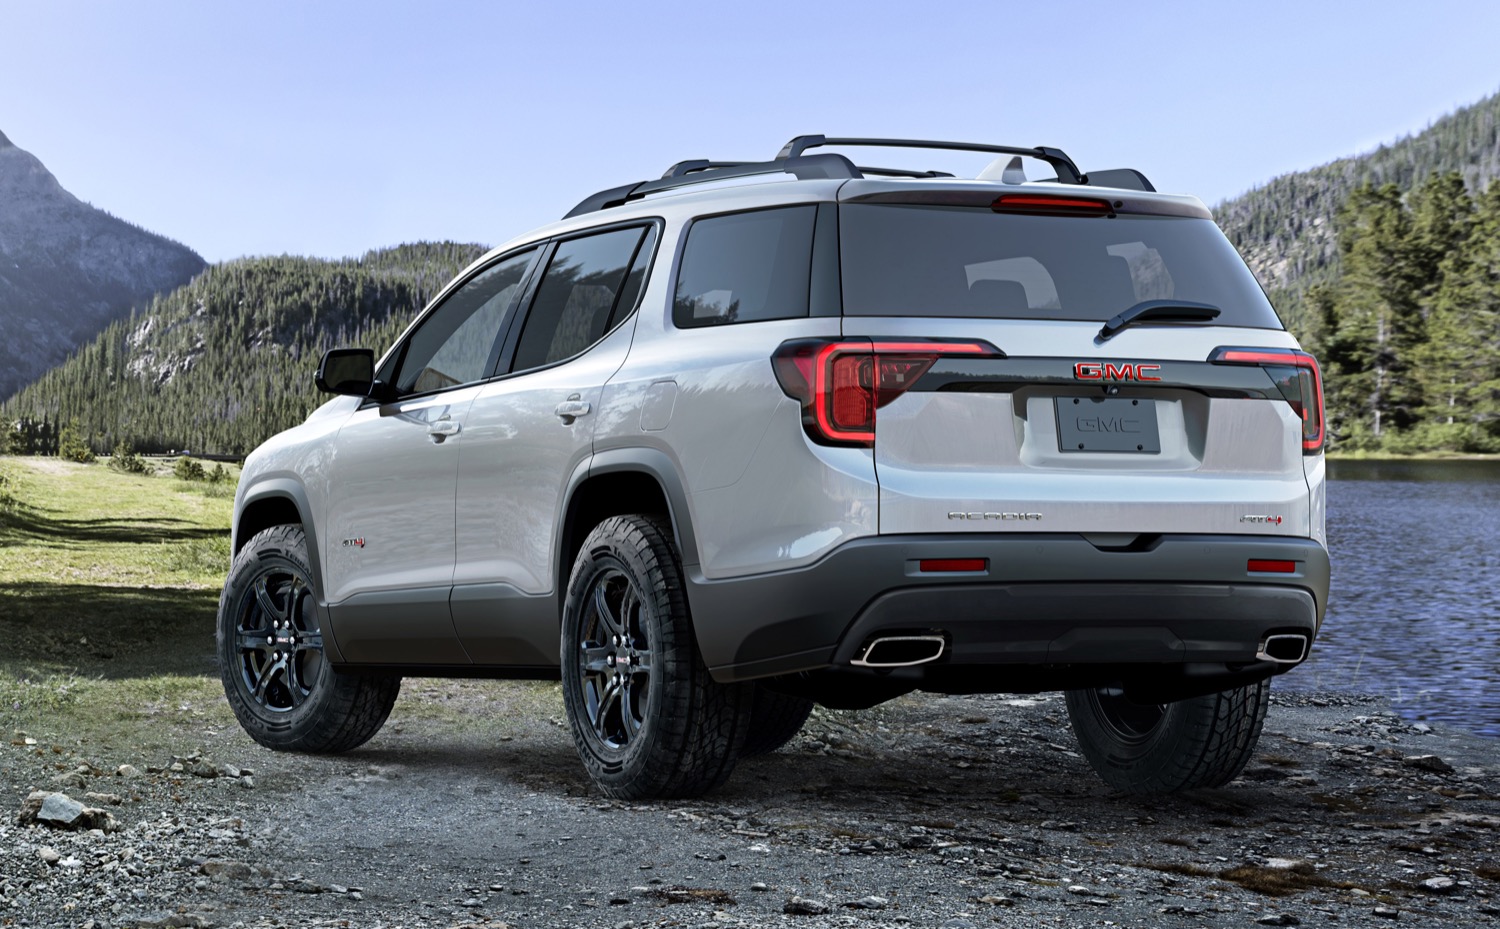 2020 GMC Acadia Facelift In The Wild: Photo Gallery | GM Authority